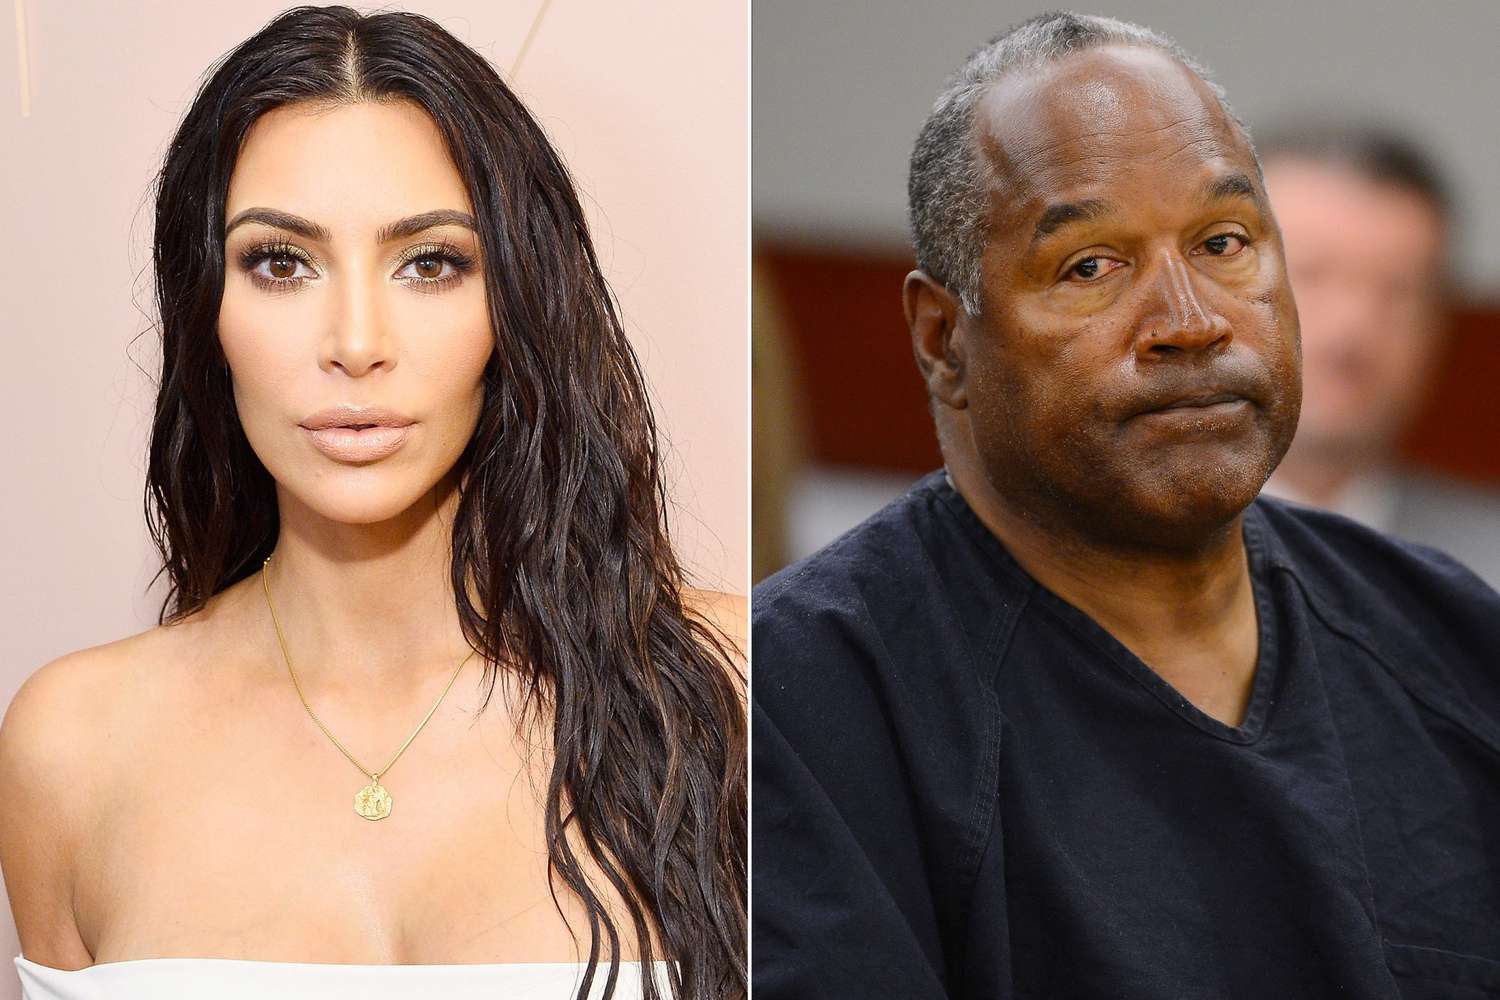 Kim Kardashian Jokingly Asks If Her 'O.J. Connection' Can Get Her Out of Jury Duty on Her Birthday Week